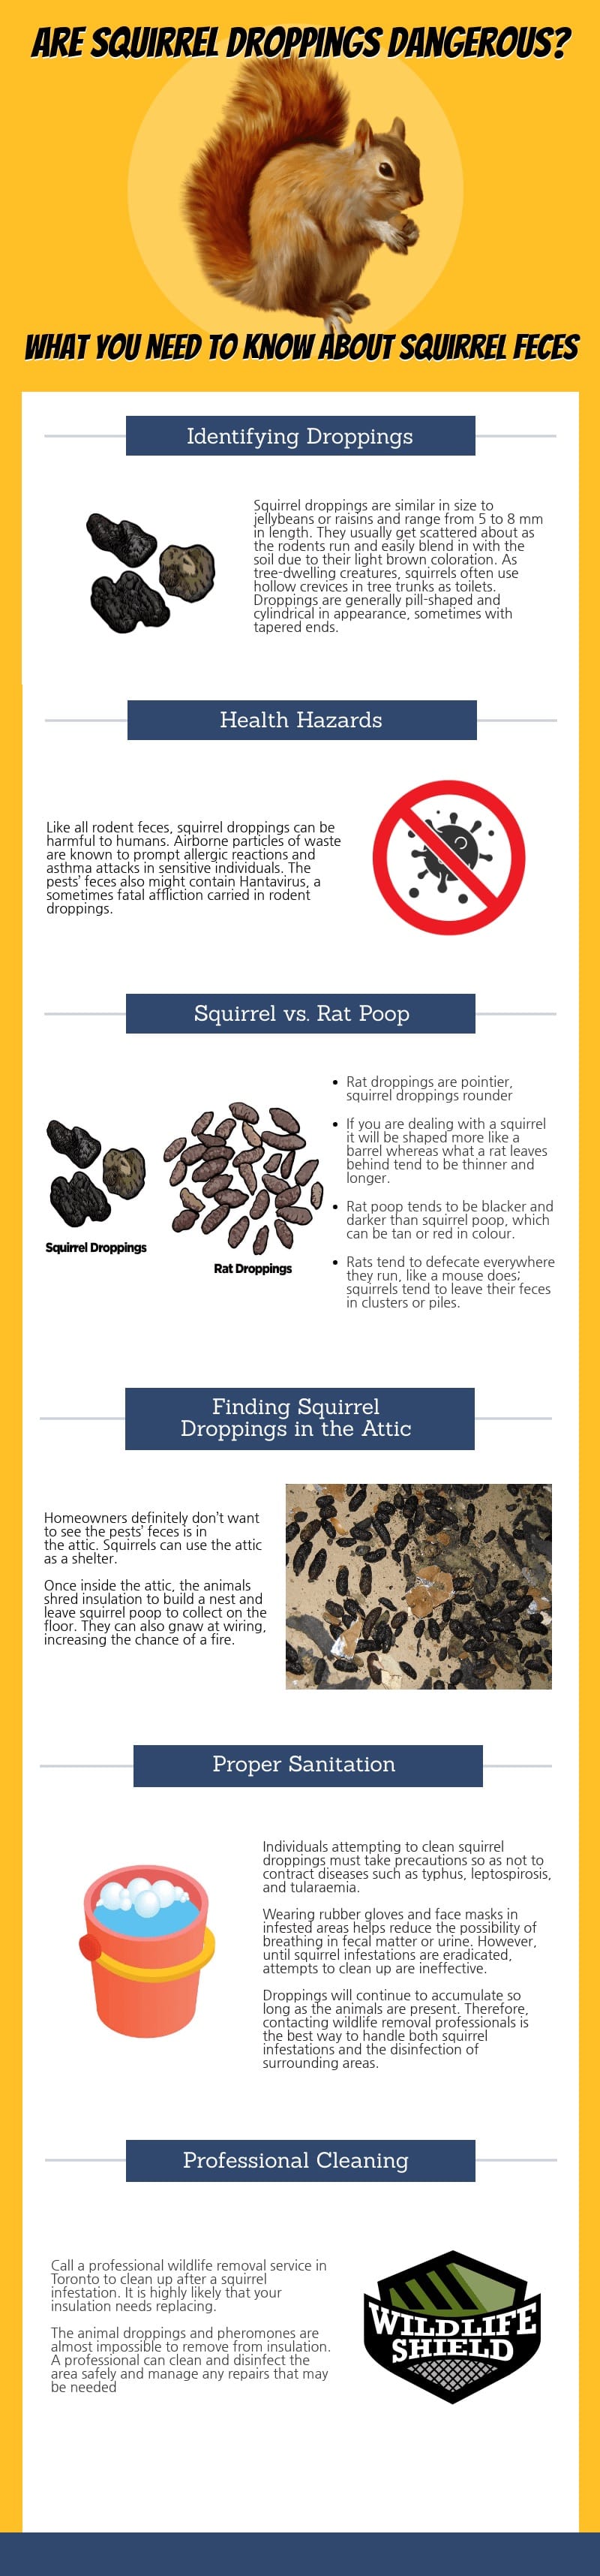 squirrel droppings and poop danger infographic